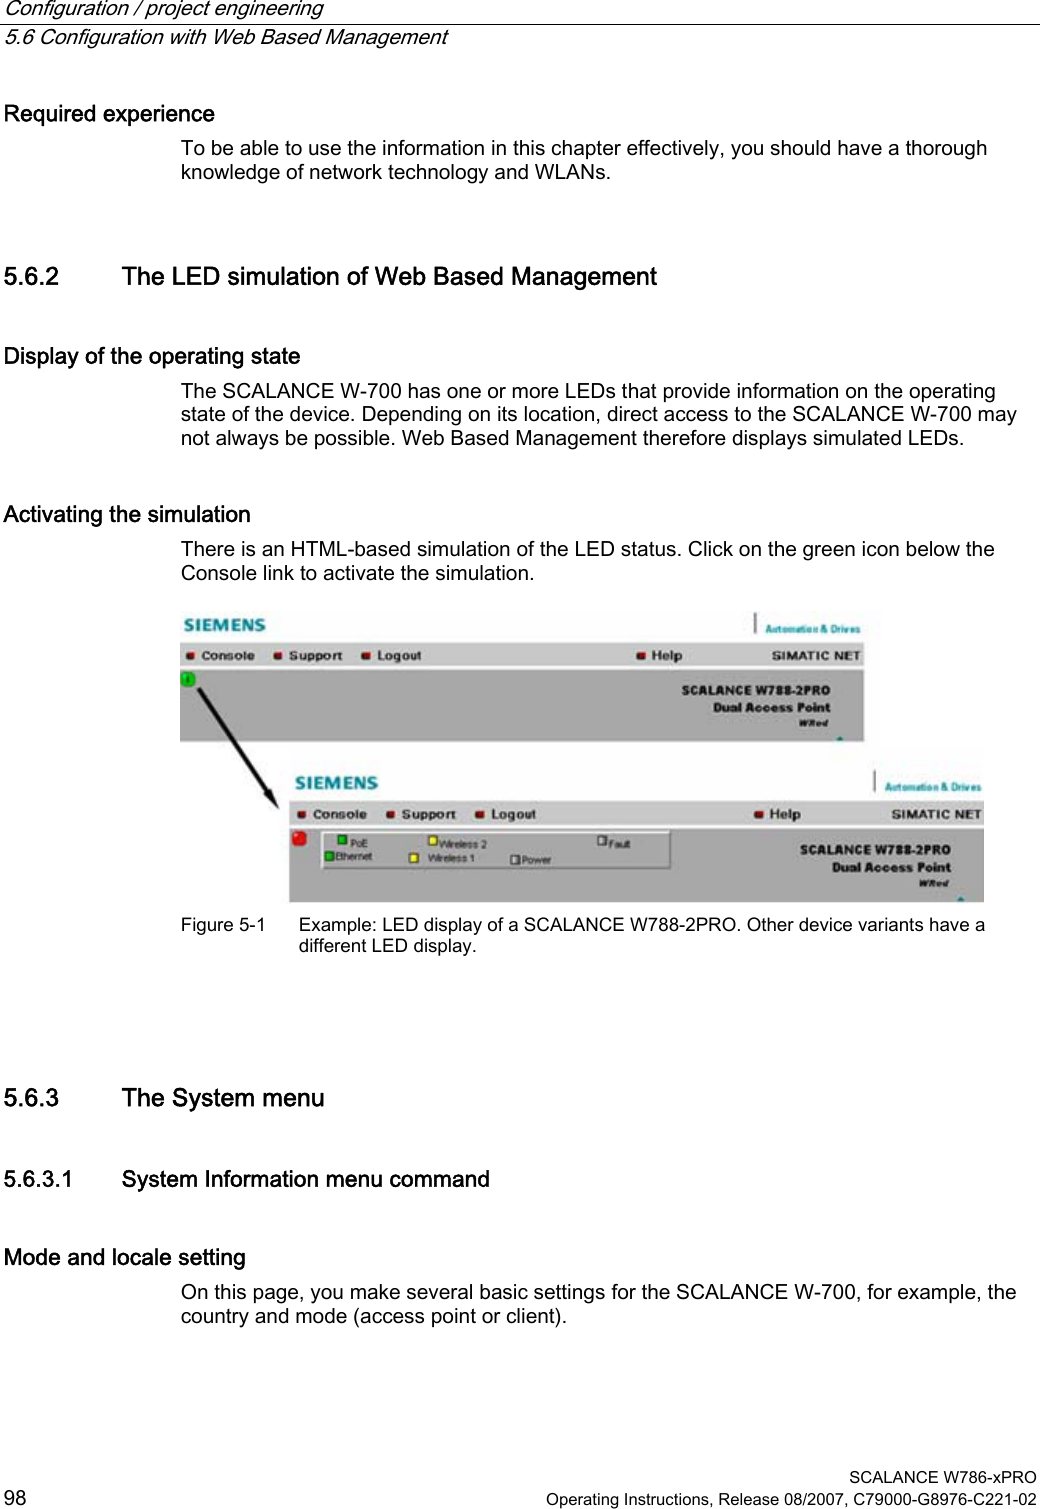 Configuration / project engineering   5.6 Configuration with Web Based Management  SCALANCE W786-xPRO 98  Operating Instructions, Release 08/2007, C79000-G8976-C221-02 Required experience To be able to use the information in this chapter effectively, you should have a thorough knowledge of network technology and WLANs. 5.6.2 The LED simulation of Web Based Management Display of the operating state The SCALANCE W-700 has one or more LEDs that provide information on the operating state of the device. Depending on its location, direct access to the SCALANCE W-700 may not always be possible. Web Based Management therefore displays simulated LEDs.  Activating the simulation There is an HTML-based simulation of the LED status. Click on the green icon below the Console link to activate the simulation.  Figure 5-1  Example: LED display of a SCALANCE W788-2PRO. Other device variants have a different LED display.  5.6.3 The System menu 5.6.3.1 System Information menu command Mode and locale setting On this page, you make several basic settings for the SCALANCE W-700, for example, the country and mode (access point or client). 